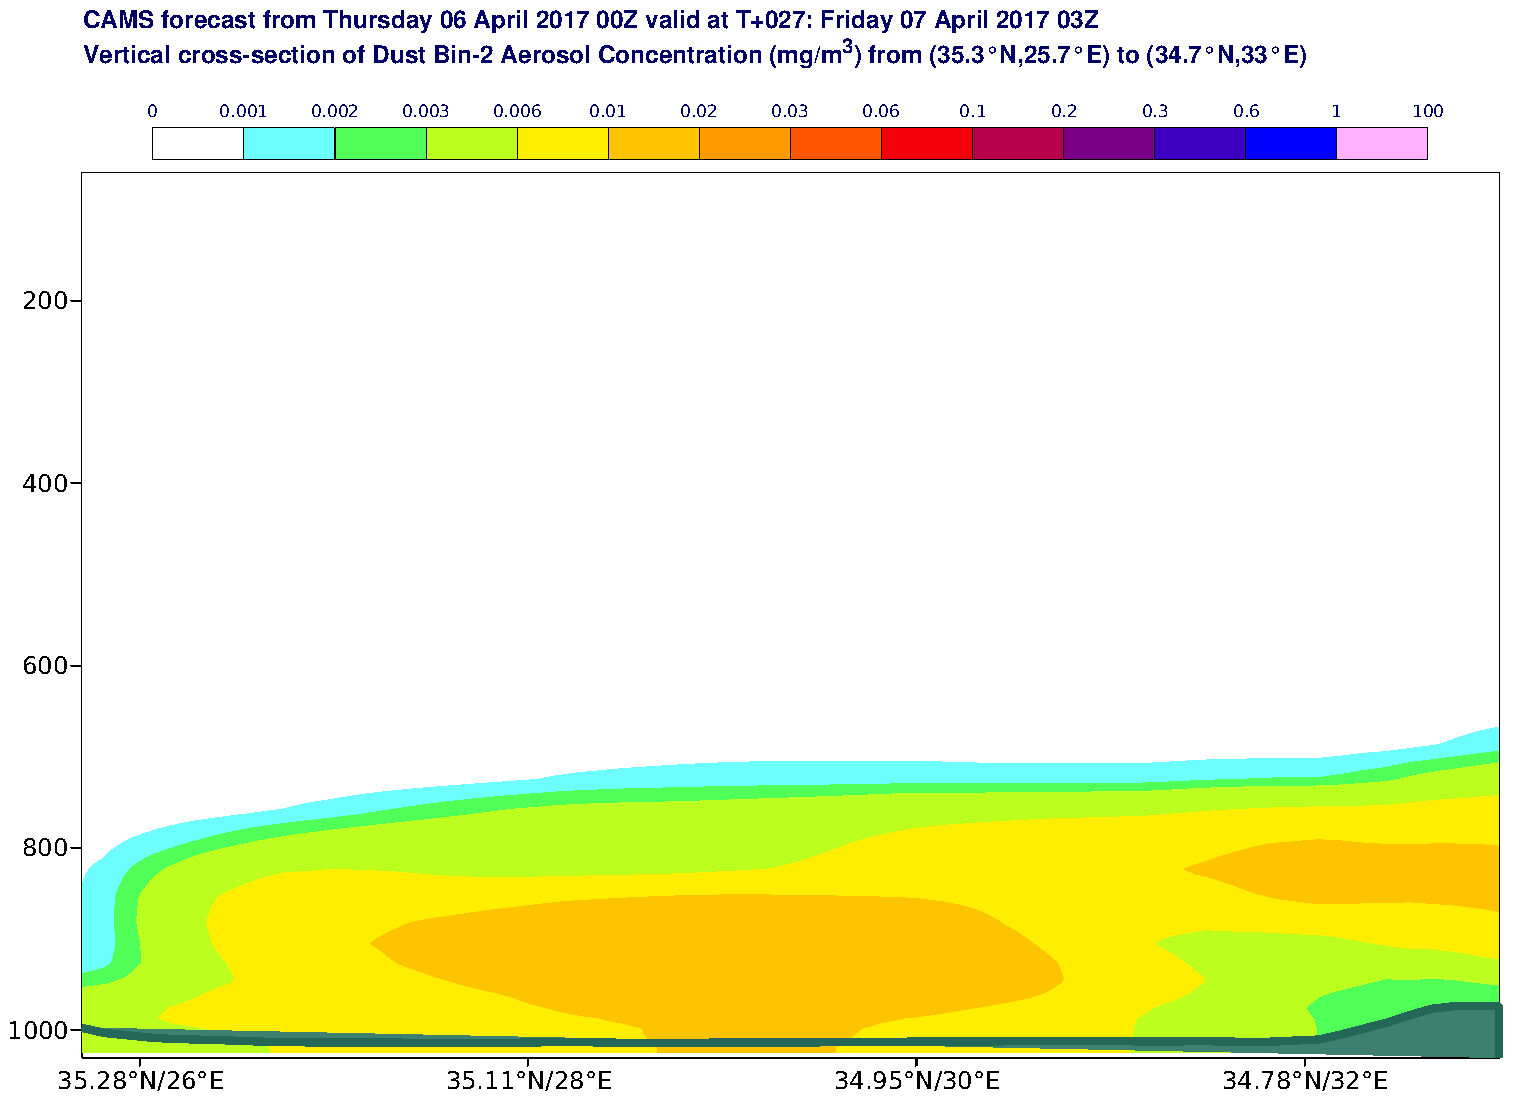 Vertical cross-section of Dust Bin-2 Aerosol Concentration (mg/m3) valid at T27 - 2017-04-07 03:00